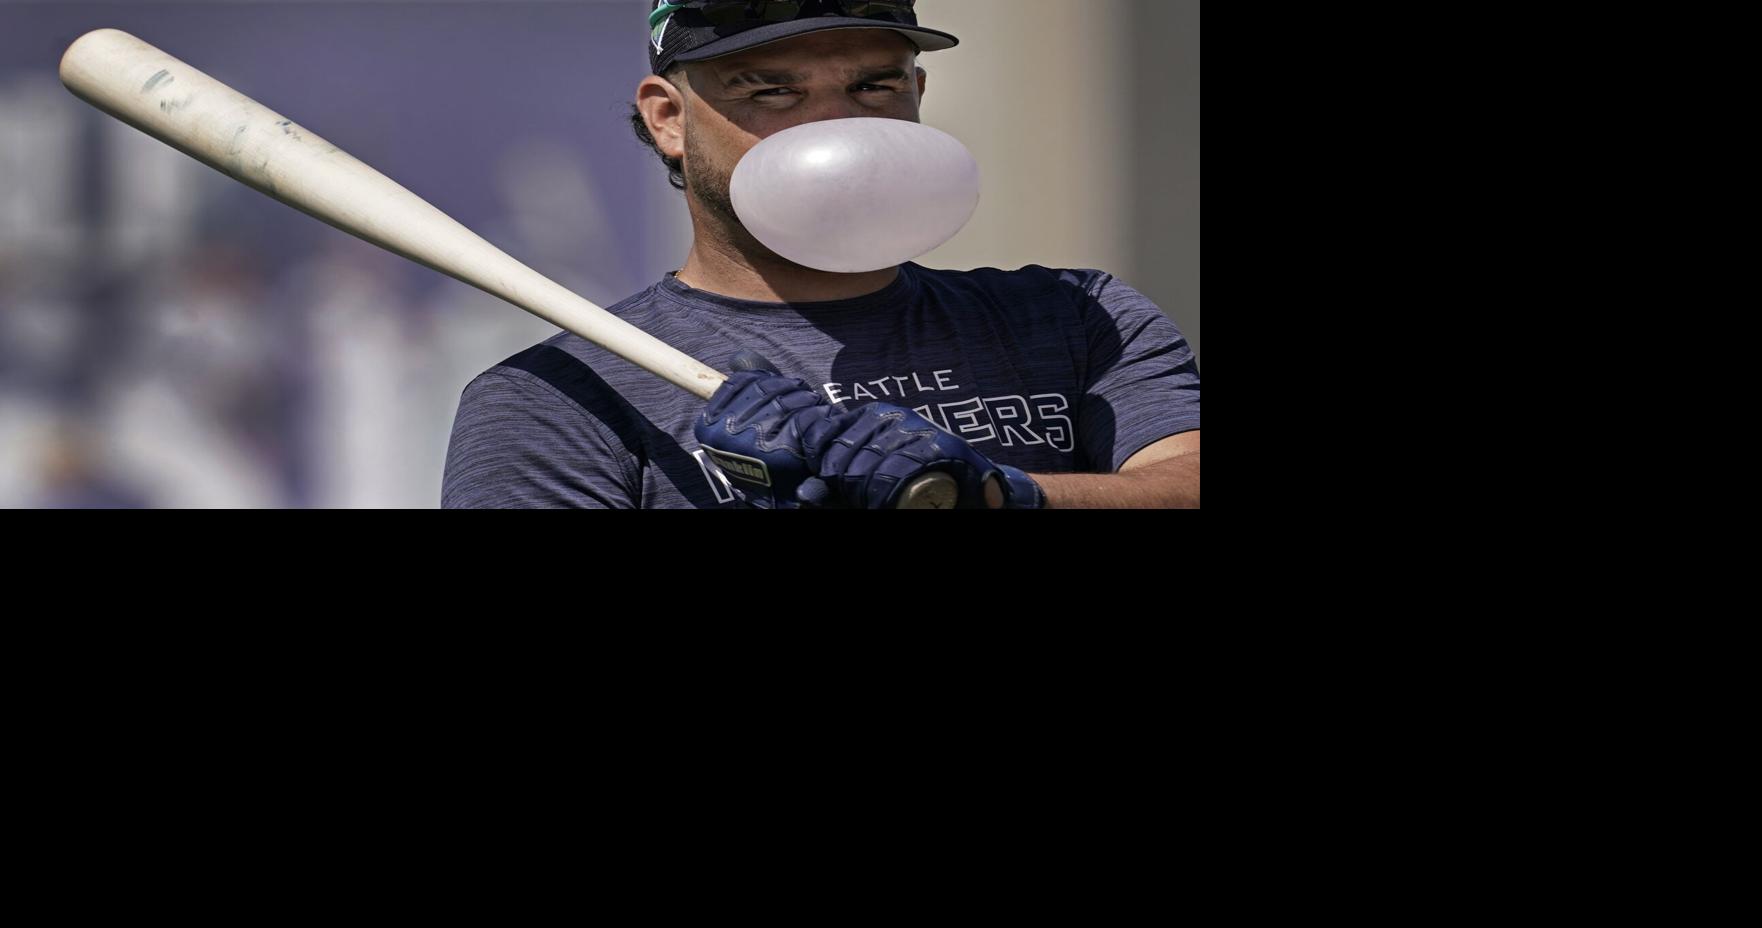 Take a look at some of Eugenio Suarez's best bubbles